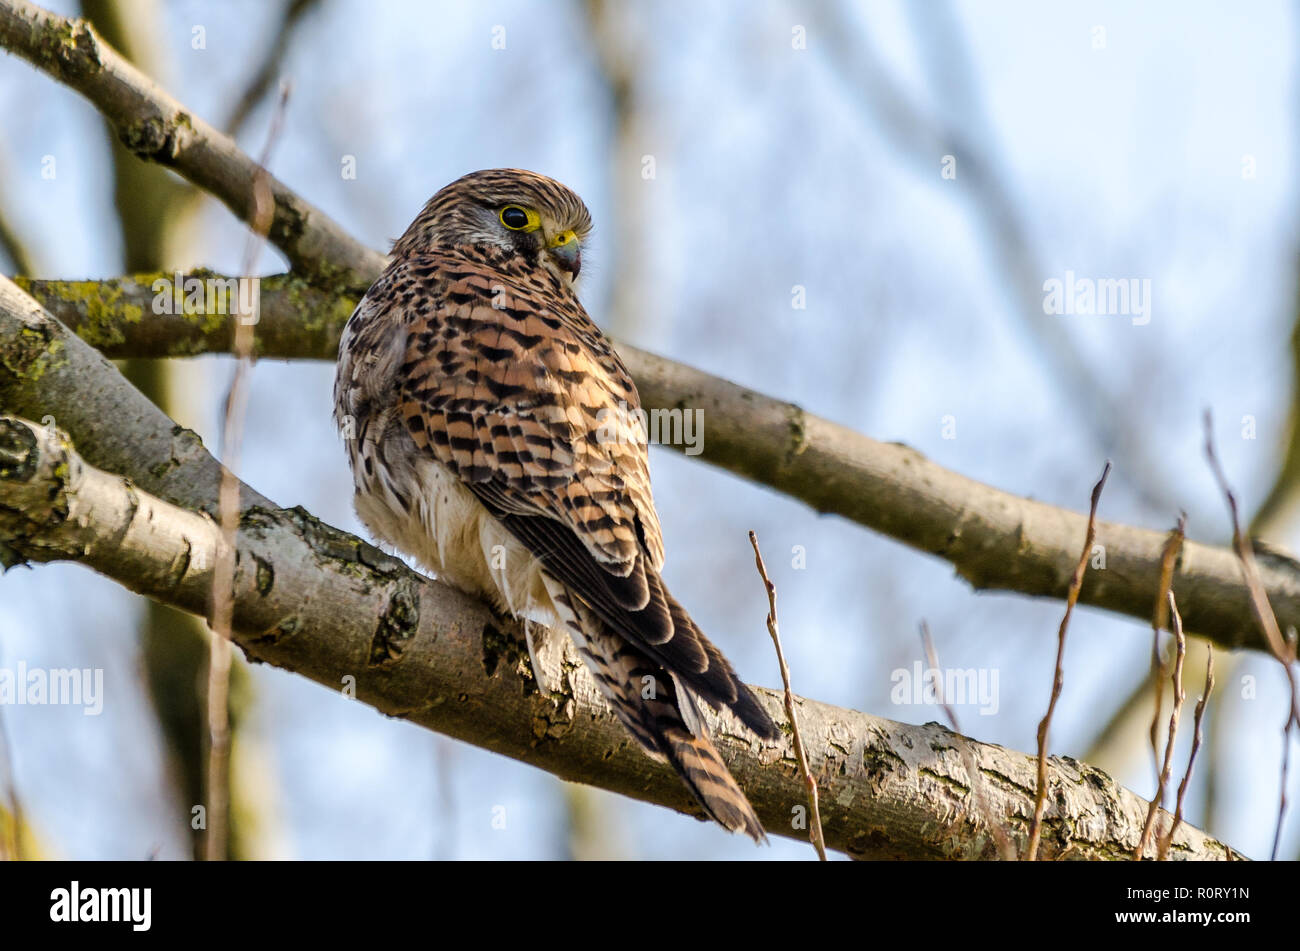 Female Common Kestrel perched on a tree branch Stock Photo